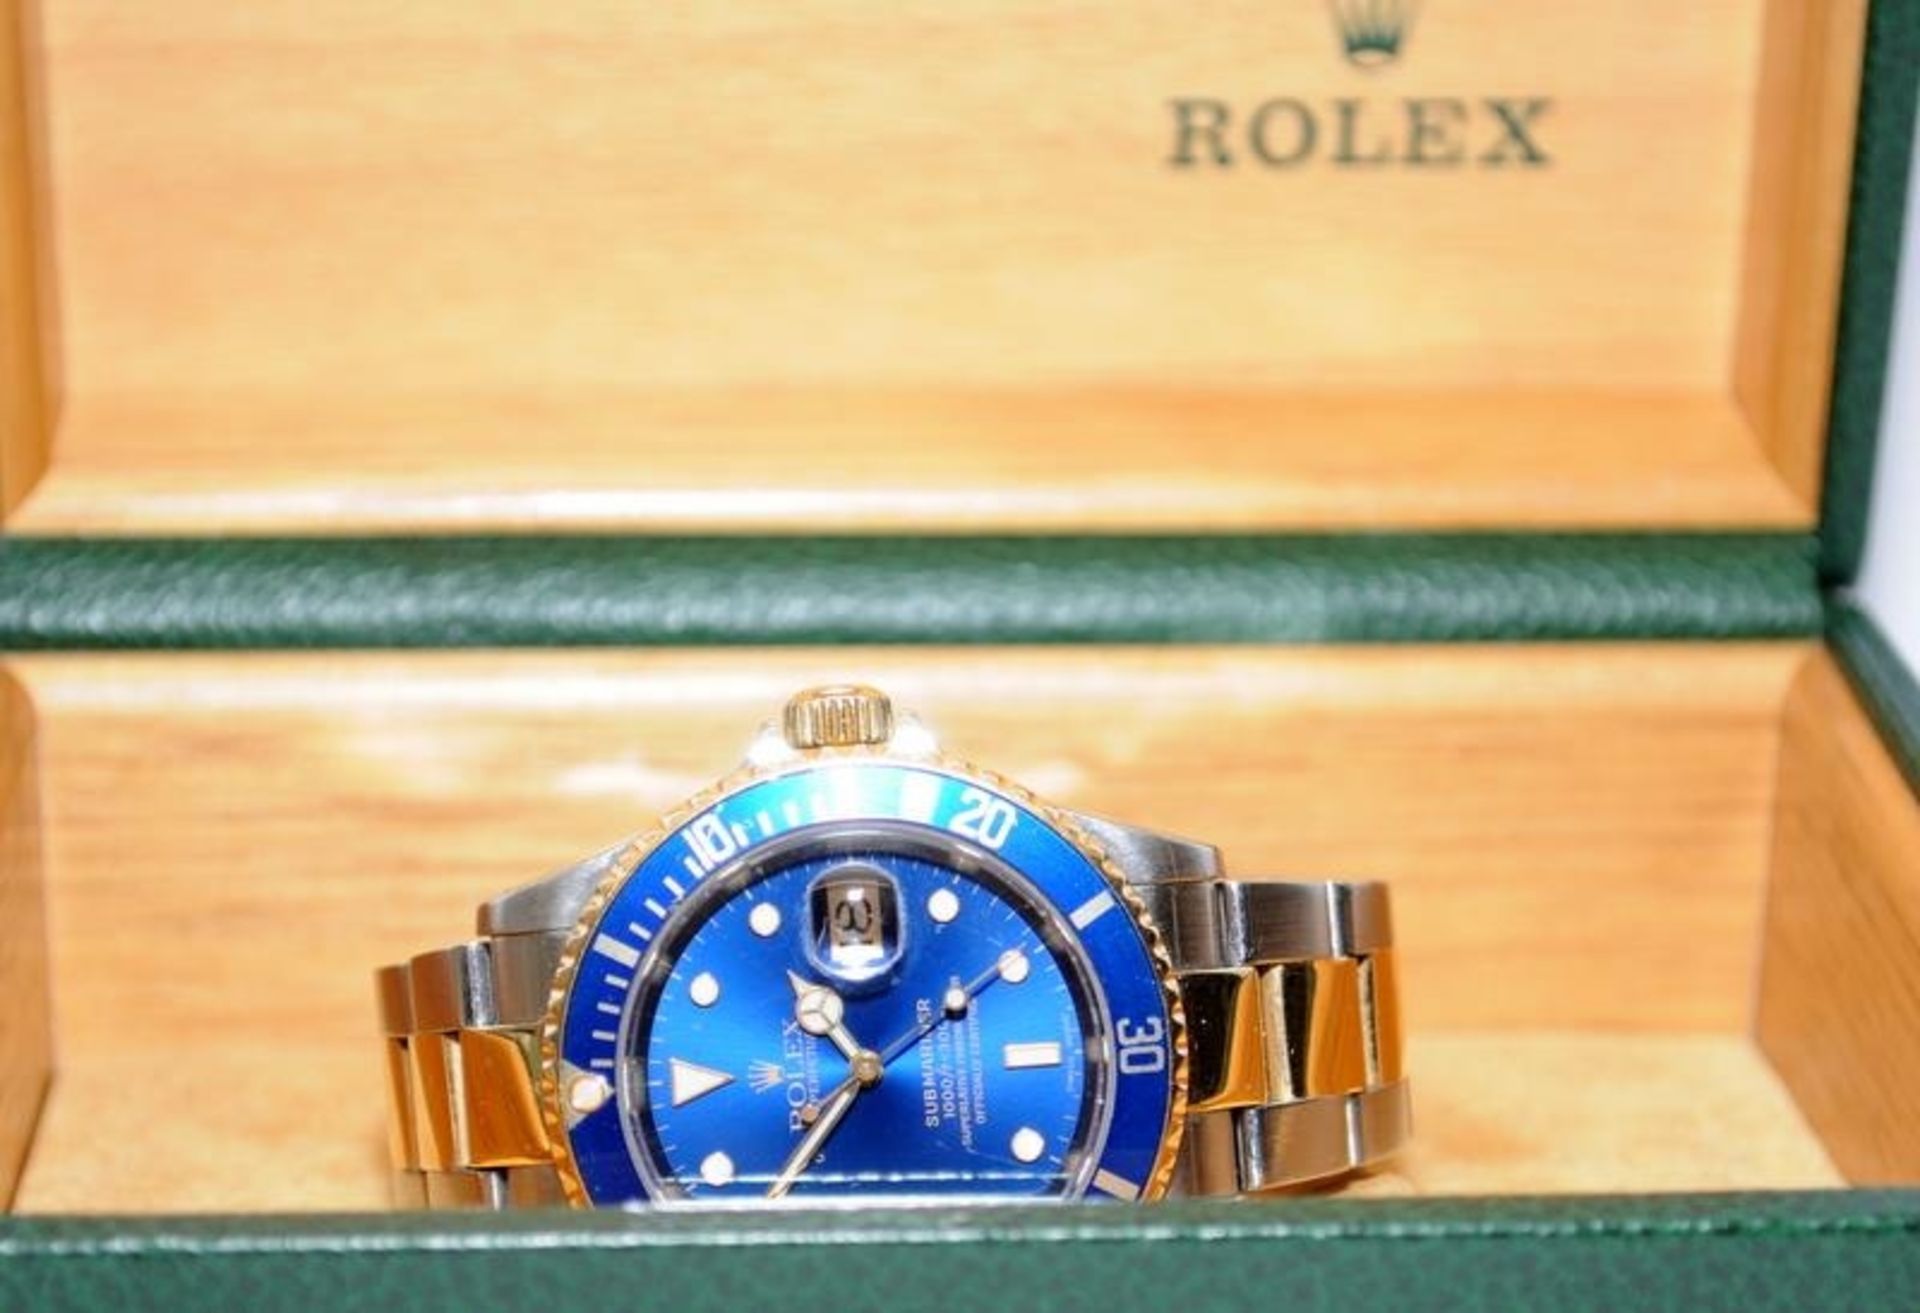 Gents Rolex Oyster Perpetual Date Submariner automatic chronometer, model number 16613. Blue dial - Image 4 of 7